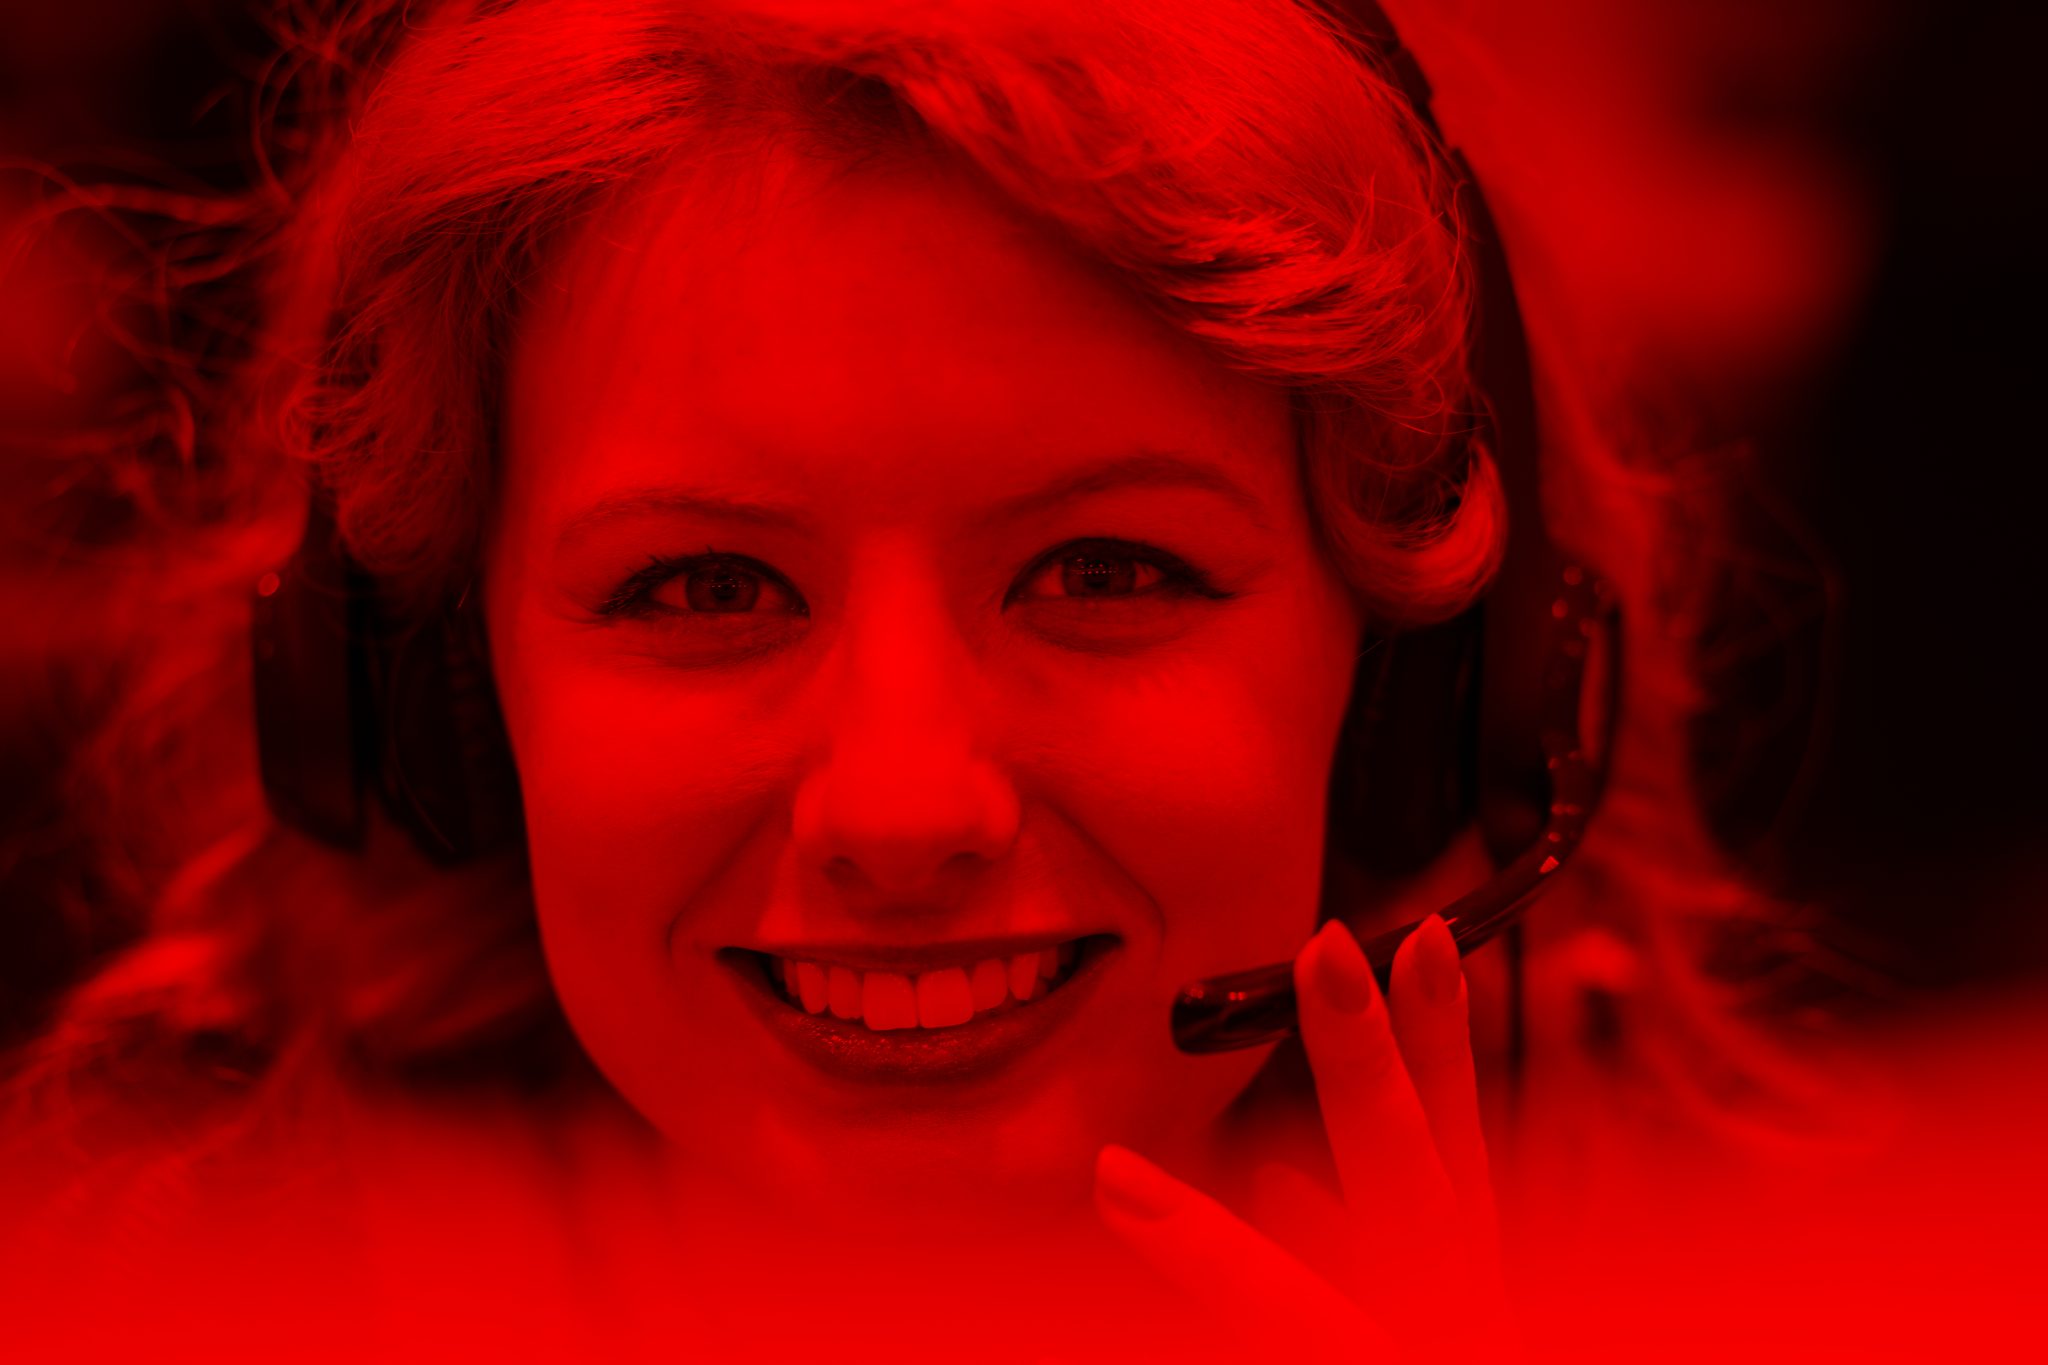 Smiling woman on call centre headset with red filter